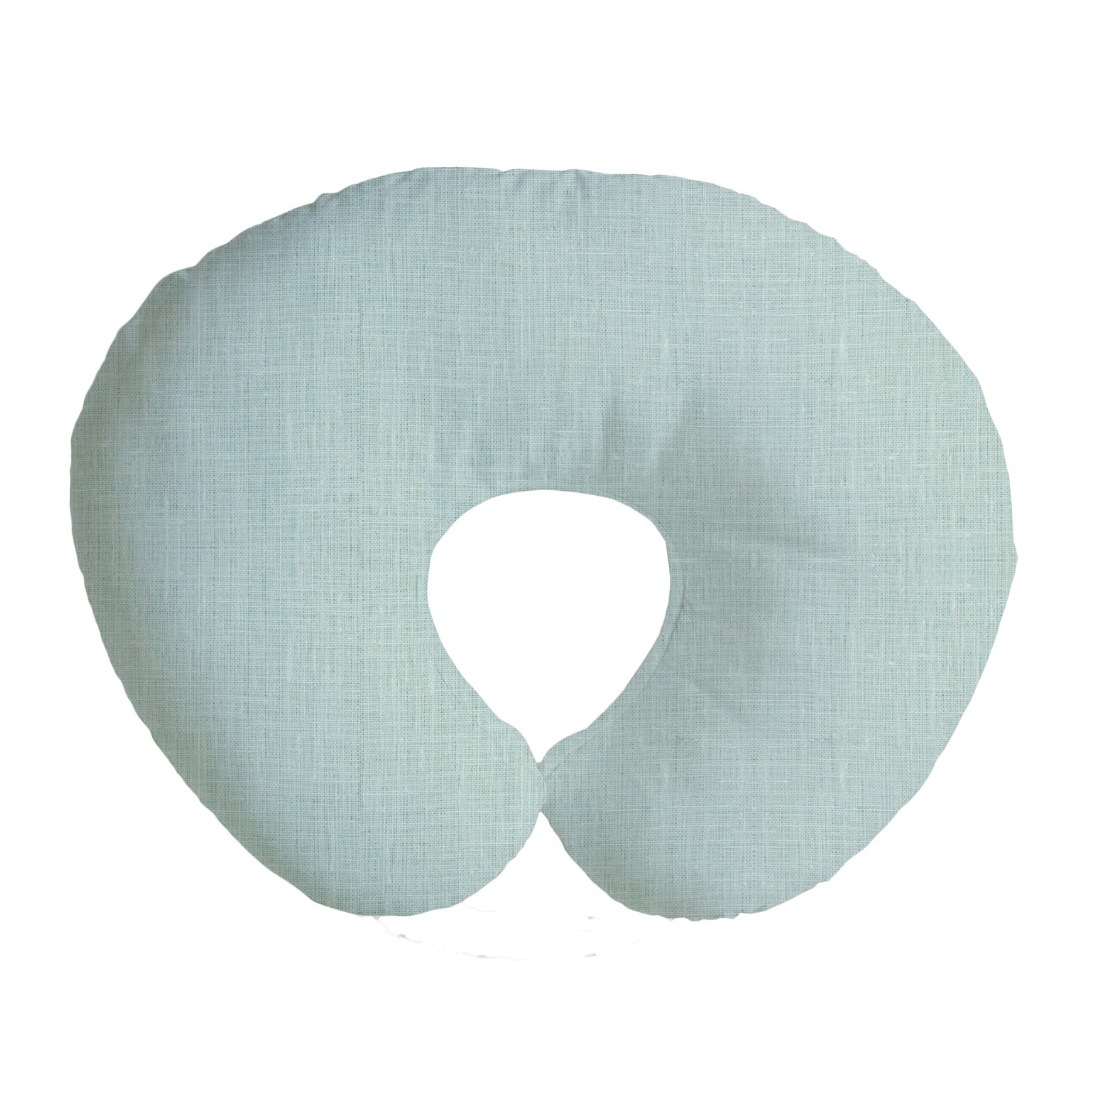 Nursing Pillow Cover | "Perfect for my neutral nursery!"